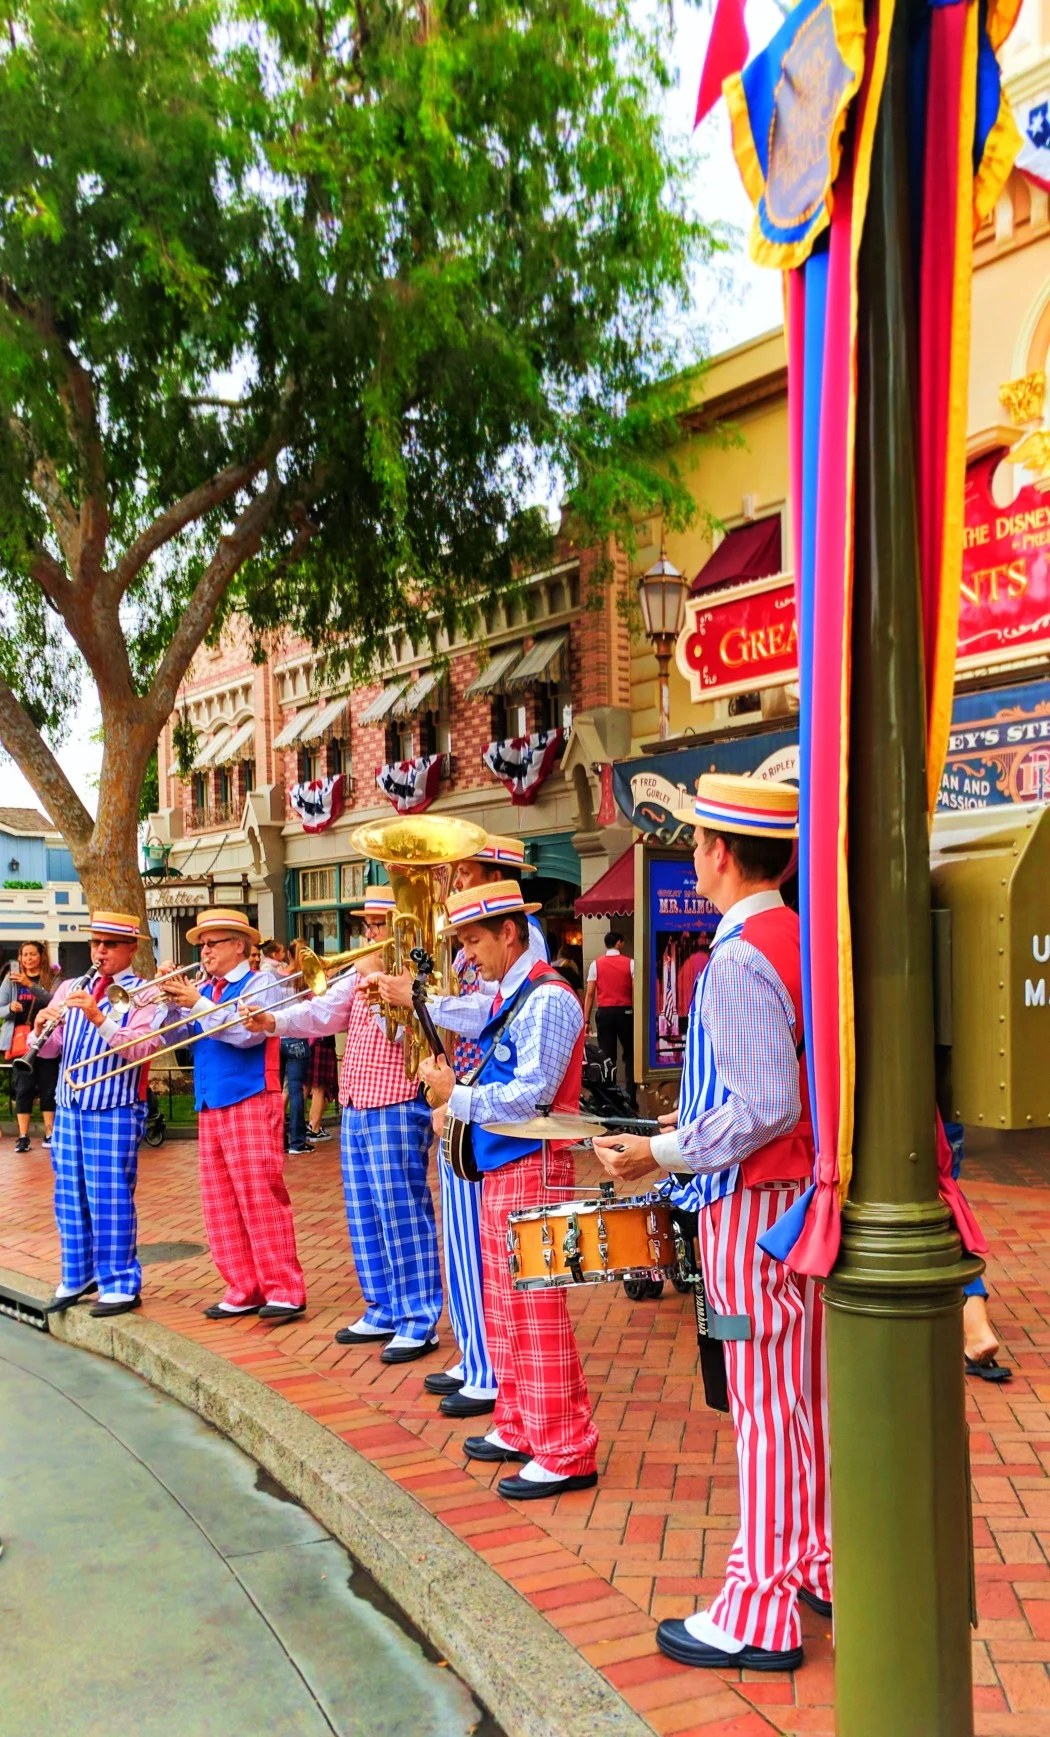 Colorful band in Town Square on Main Street USA Disneyland 1